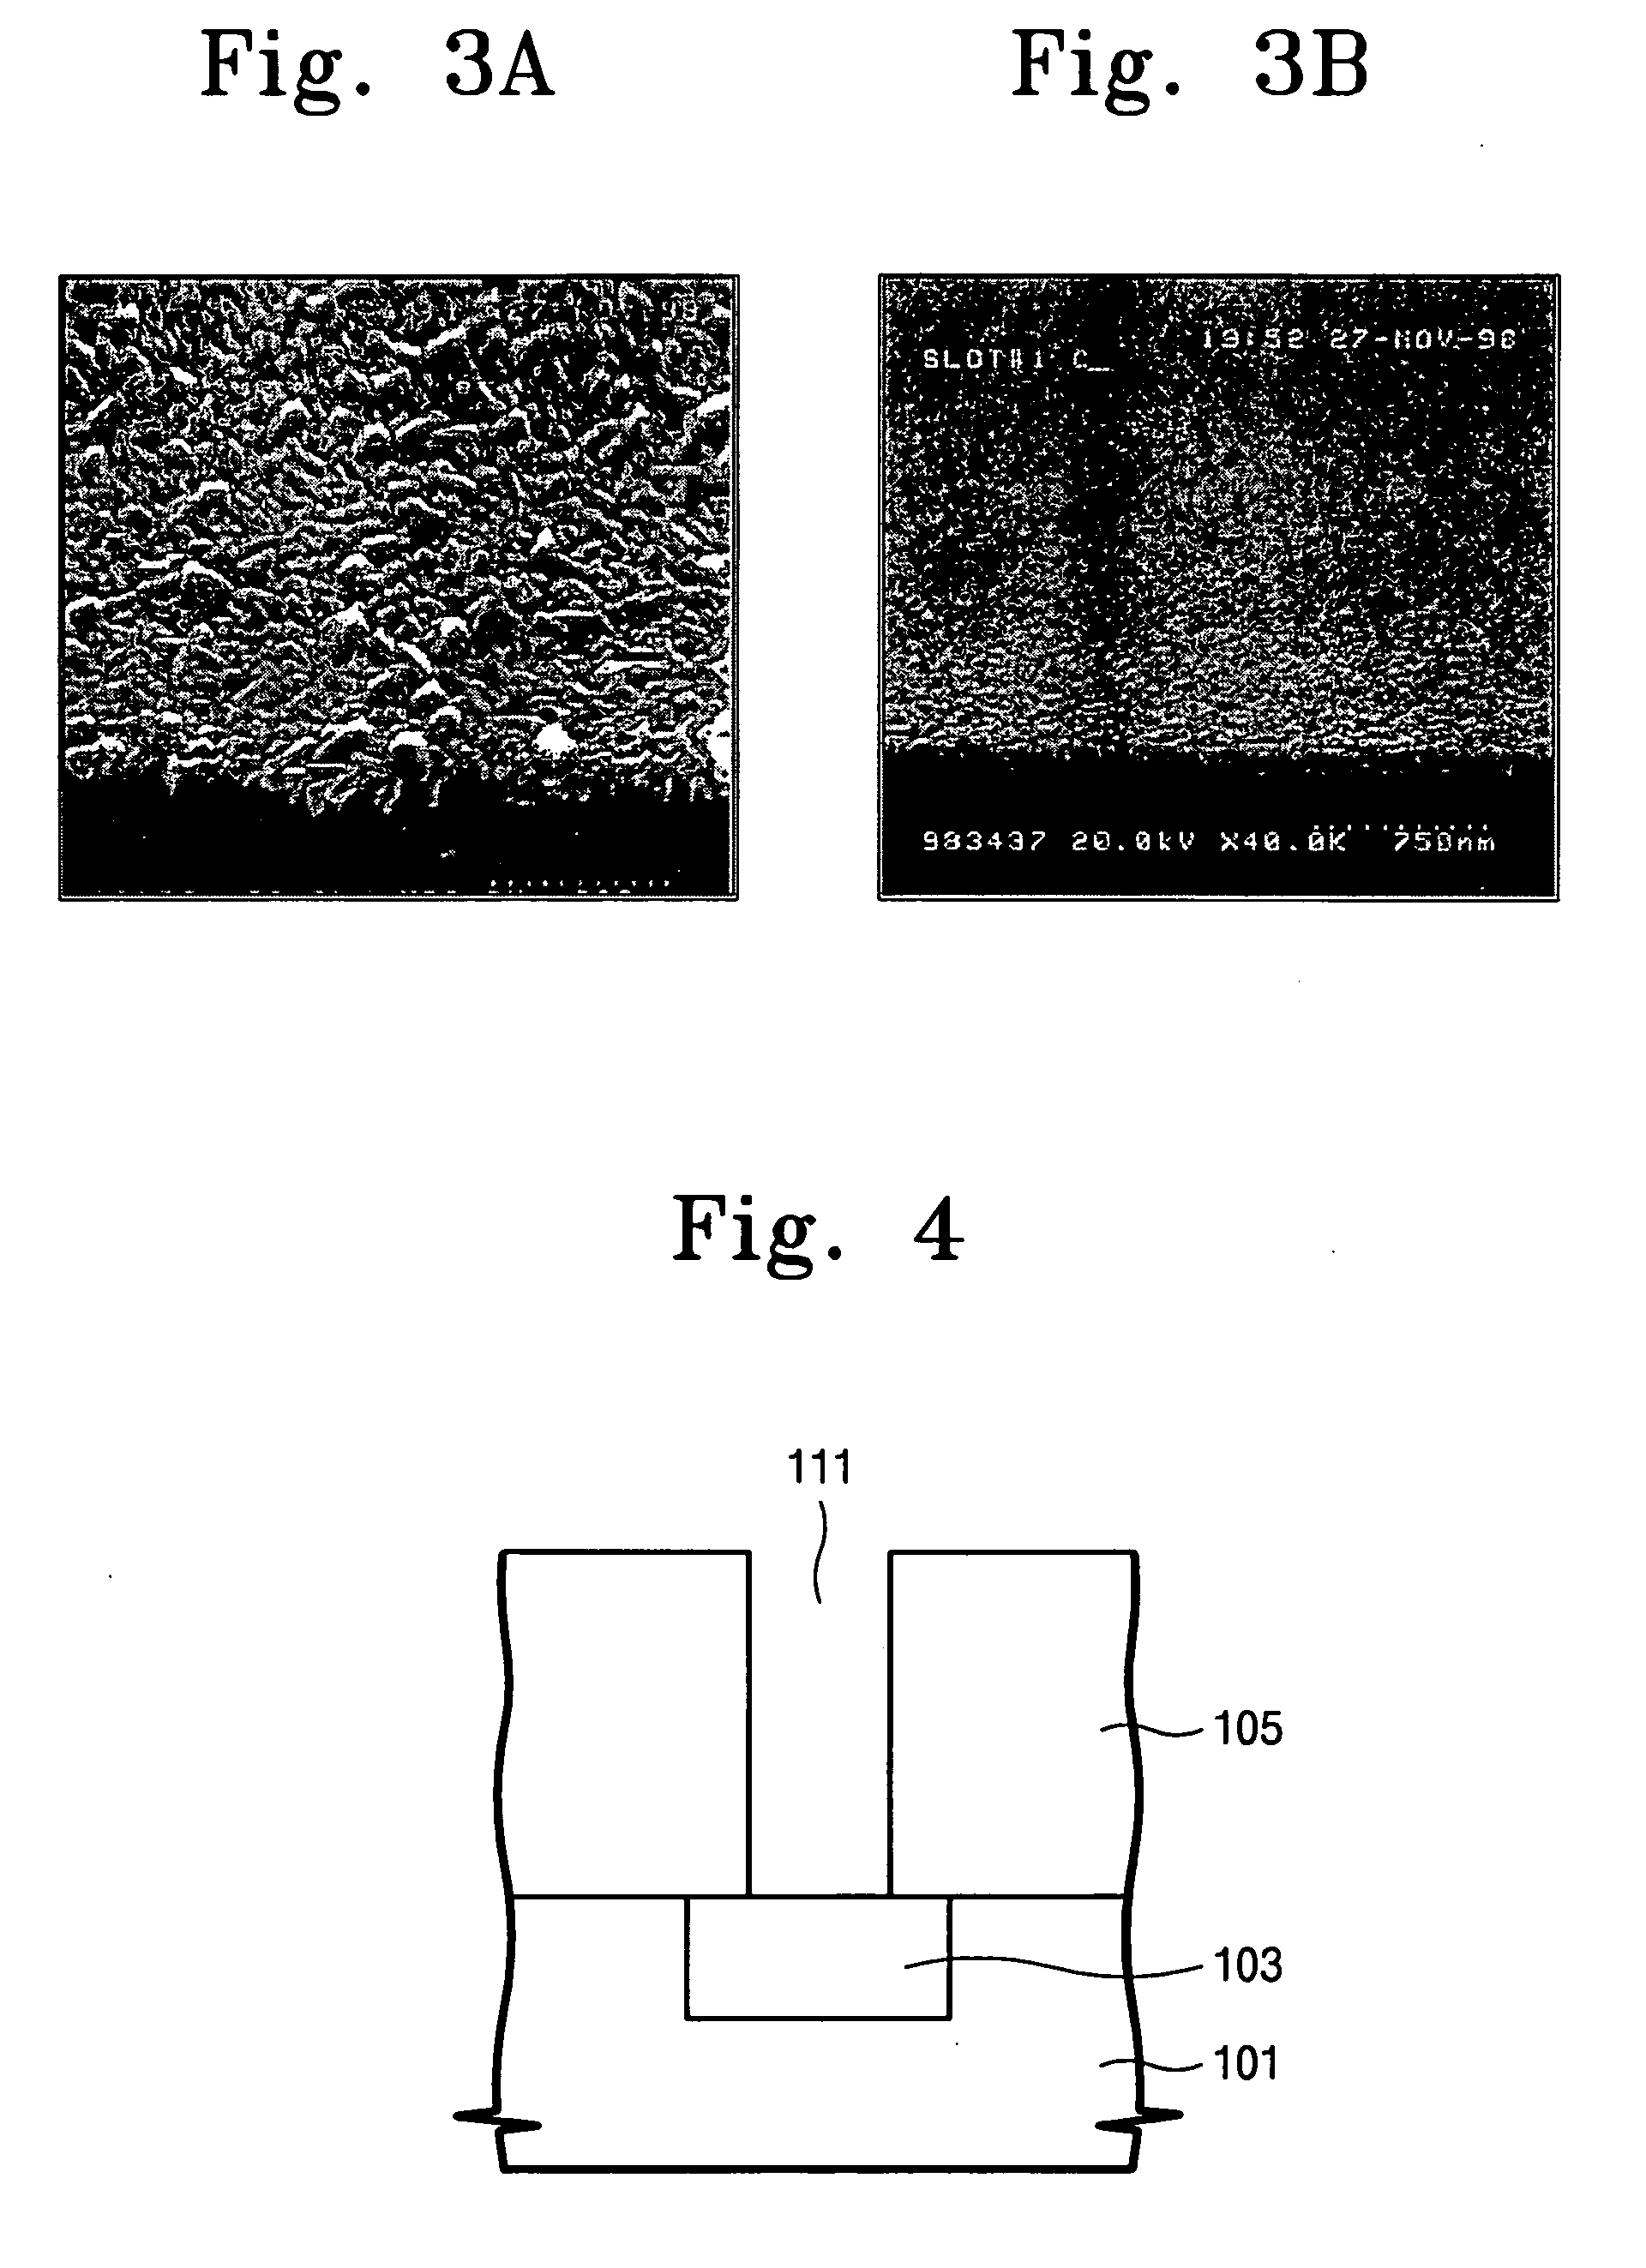 Method for forming an electrical interconnection providing improved surface morphology of tungsten